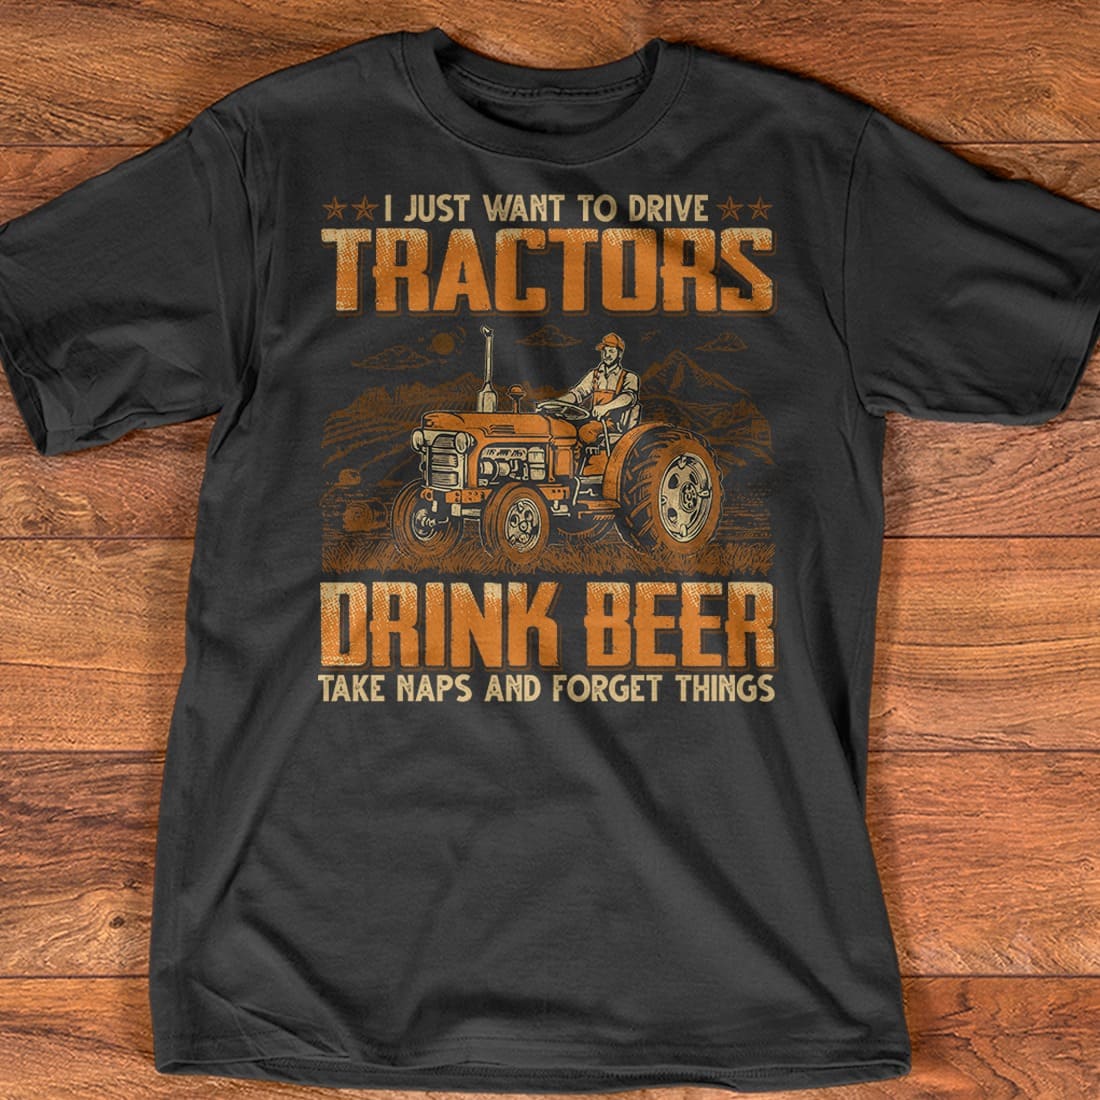 I just want to drive tractors drink beer take naps and forget things - Drinking and driving tractors